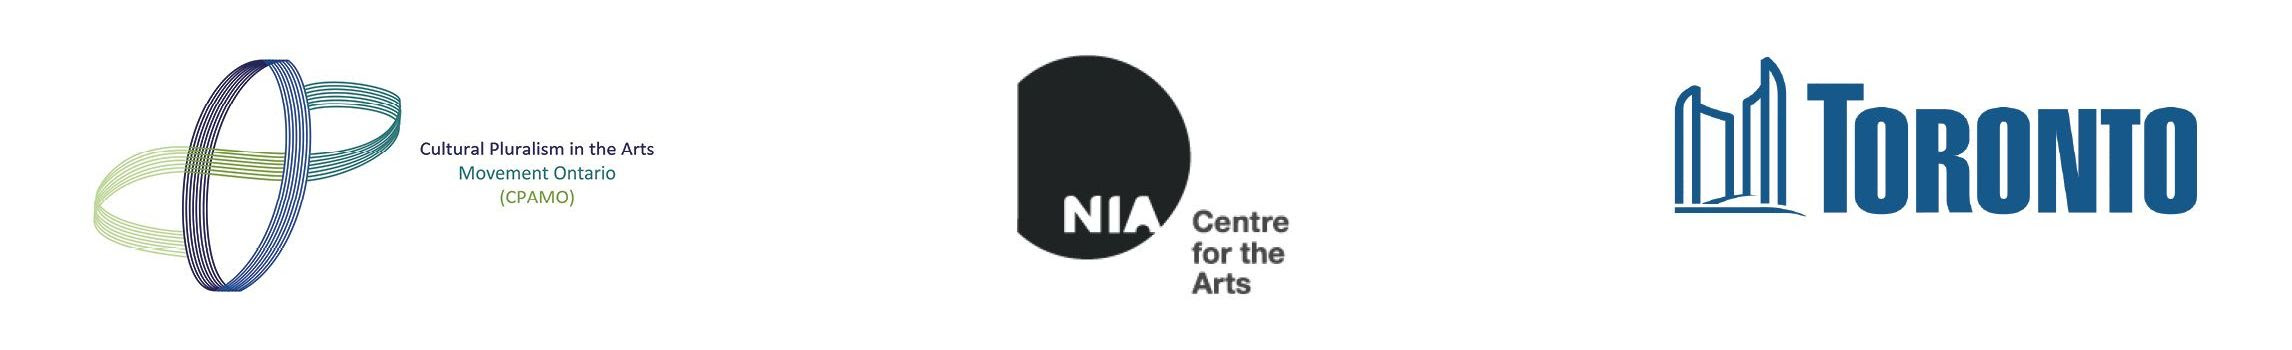 Logos of CPAMO, NIA Center for the Arts and the City of Toronto 